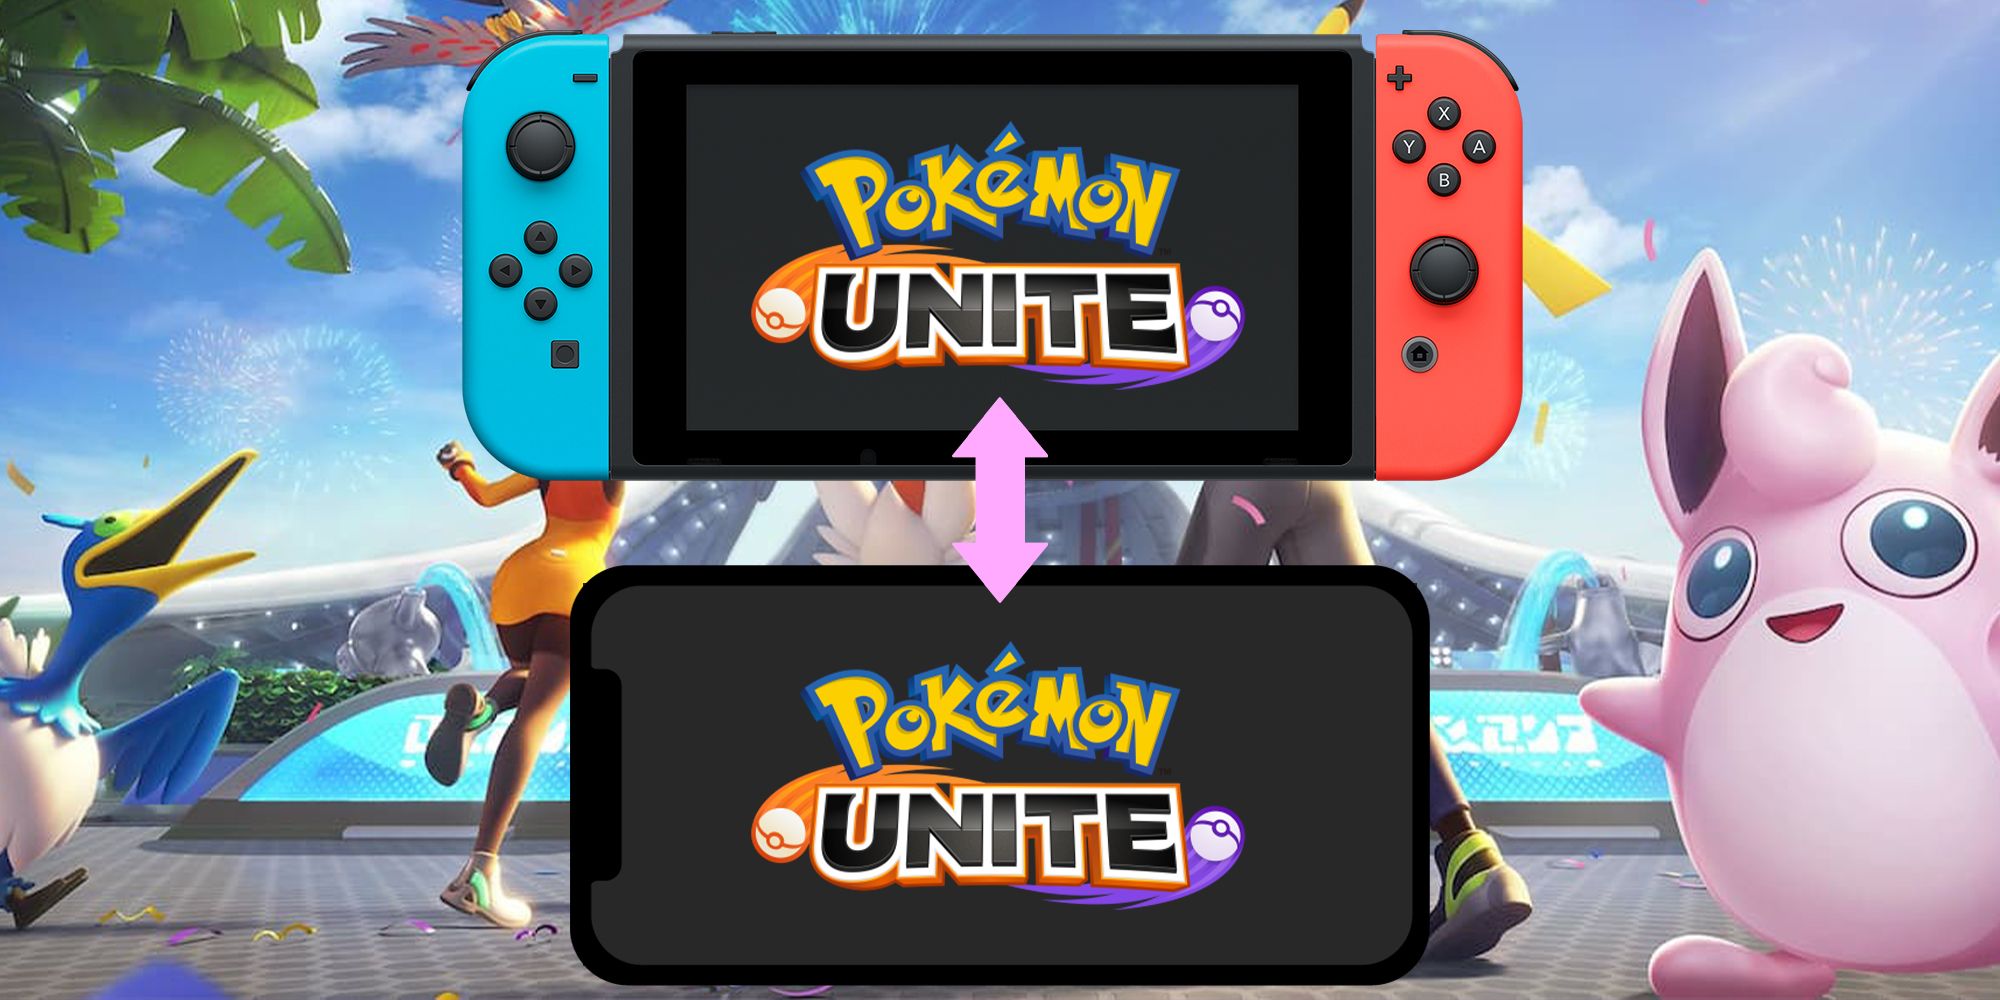 How to Connect Your Pokémon Unite Account to Mobile